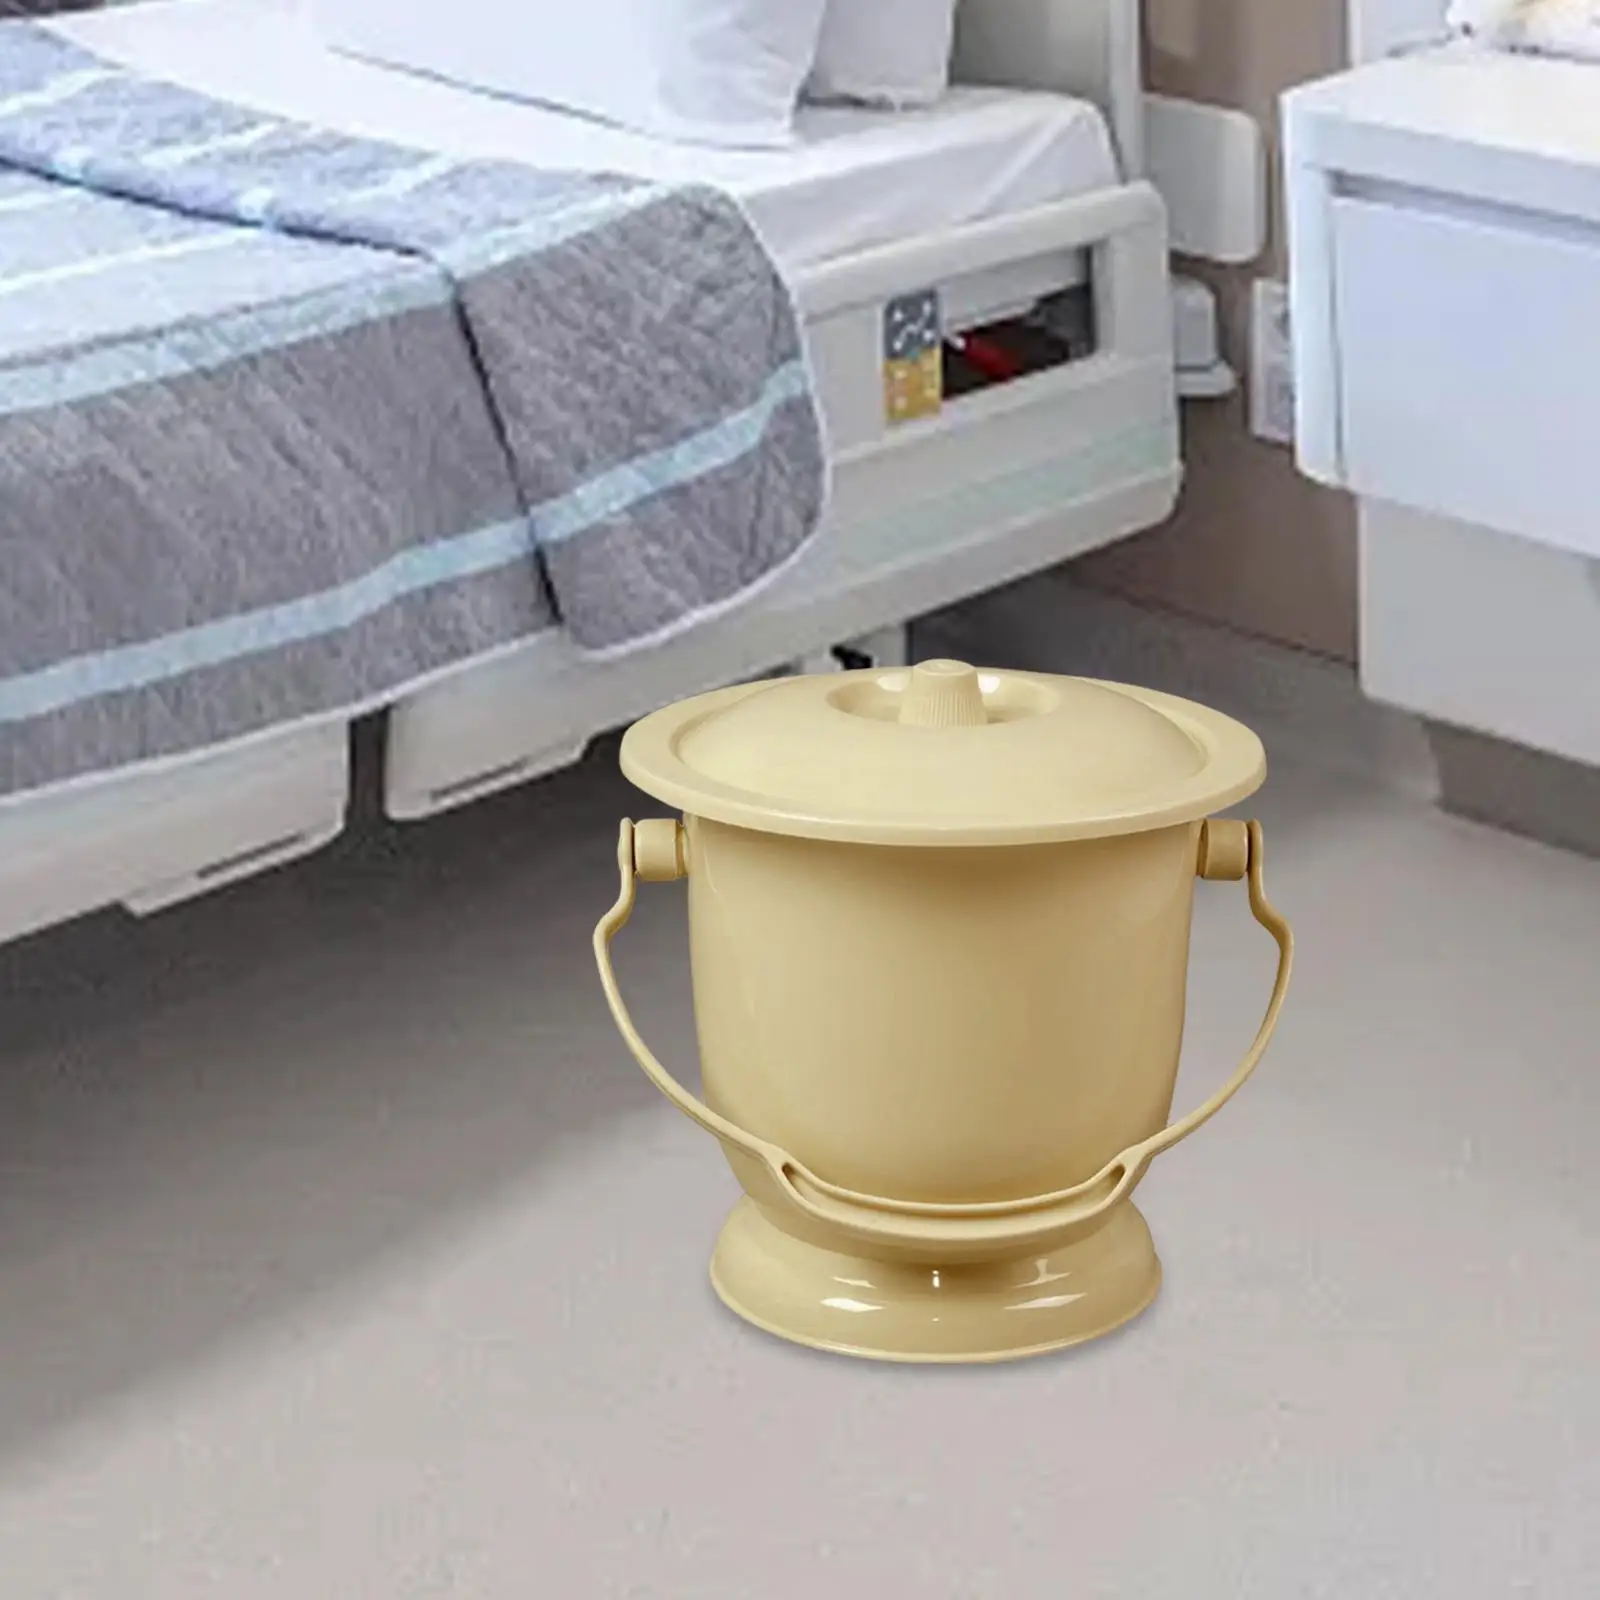 Chamber Pot with Lid Bedpan Spittoon Plastic Urinal Toilet Urinal Bottle